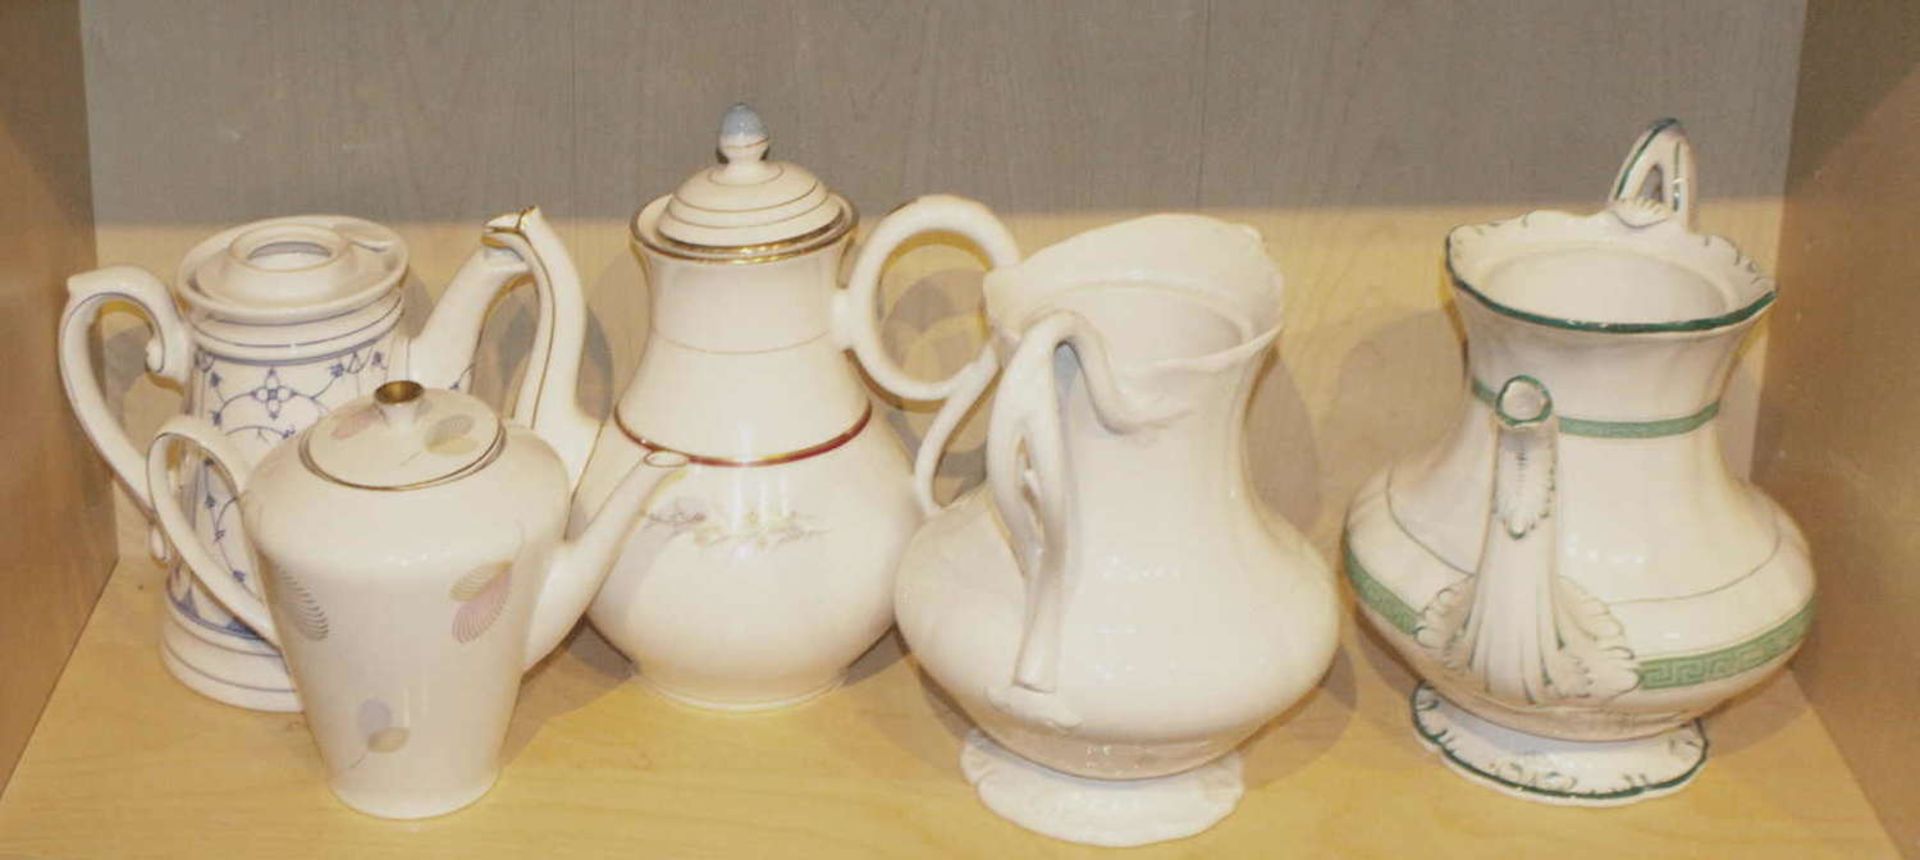 large lot of coffee pots, a total of 5 pieces, as well old Villeroy & Boch, 2 lids missing.